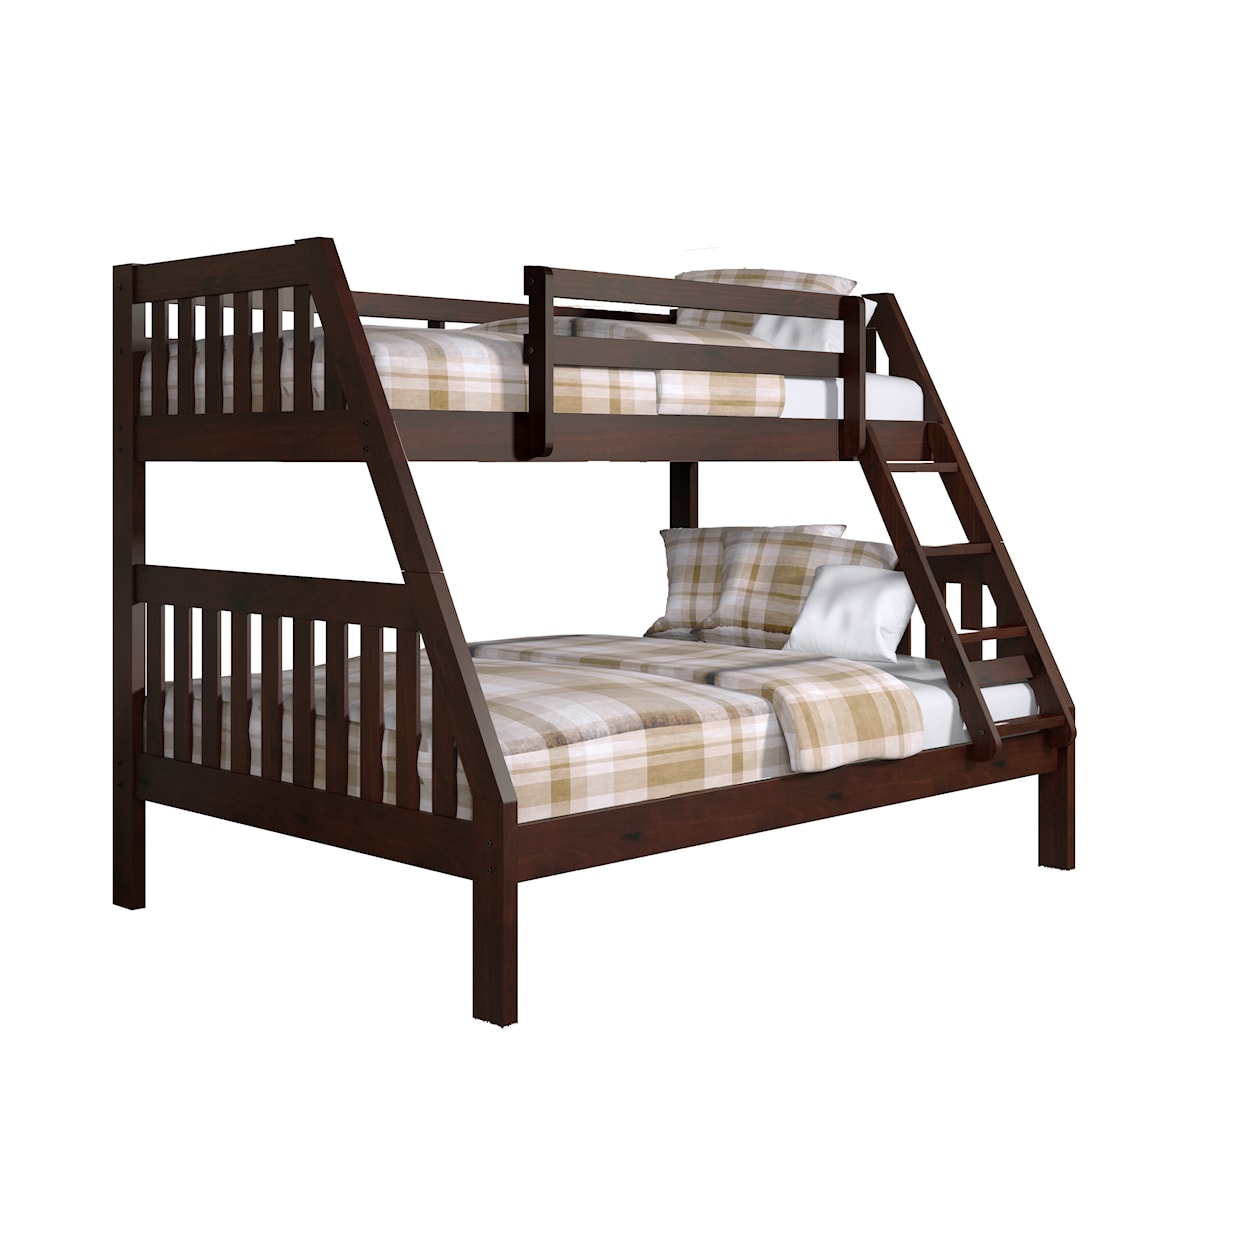 Donco Trading Co Donco Trading Co Twin/Full Bunk Bed